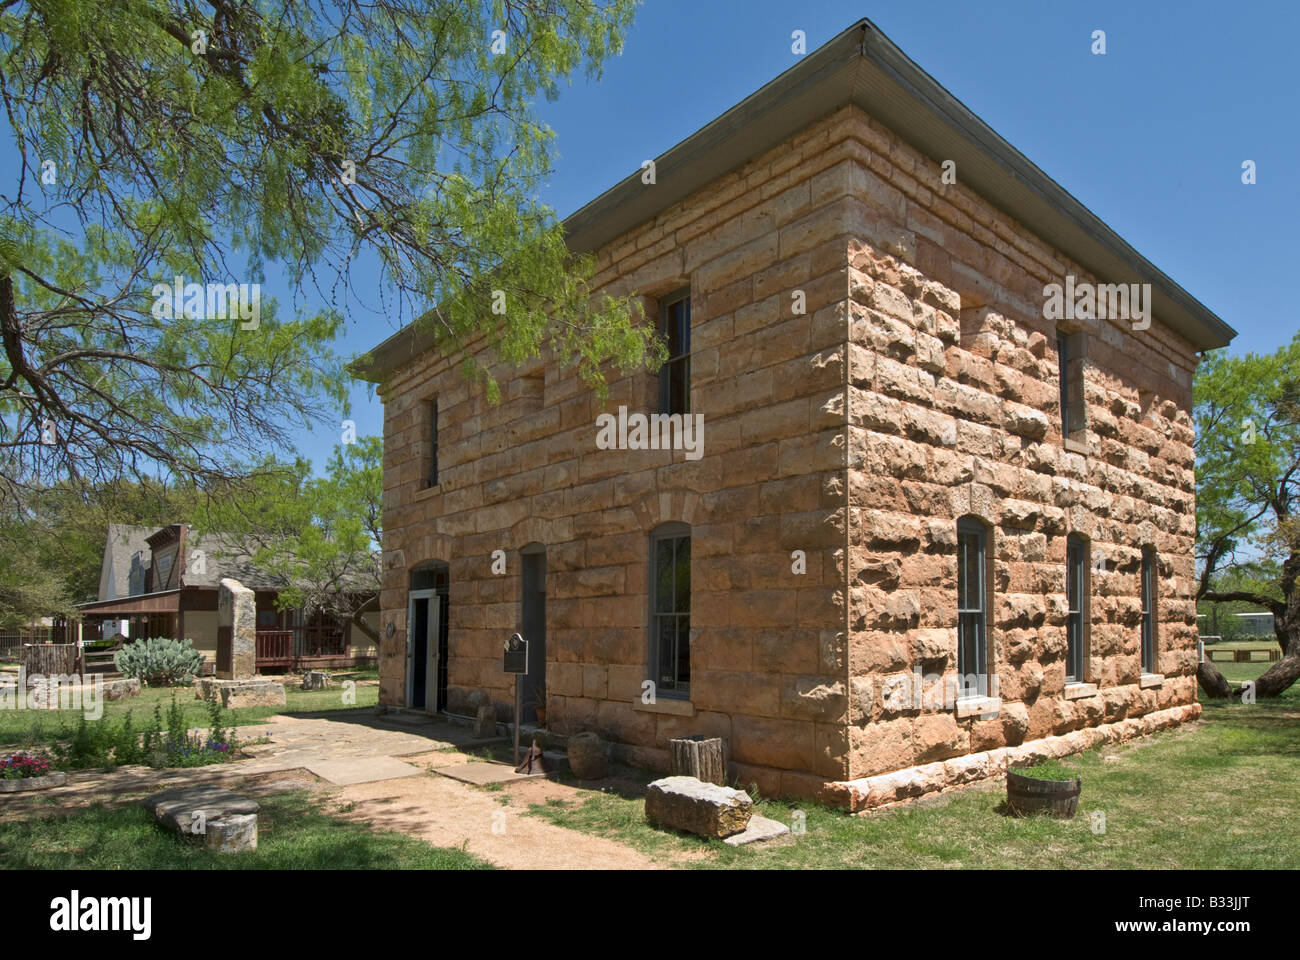 Texas Buffalo Gap Historic Village relocated restored buildings First Taylor County Courthouse and Jail built 1879 Stock Photo